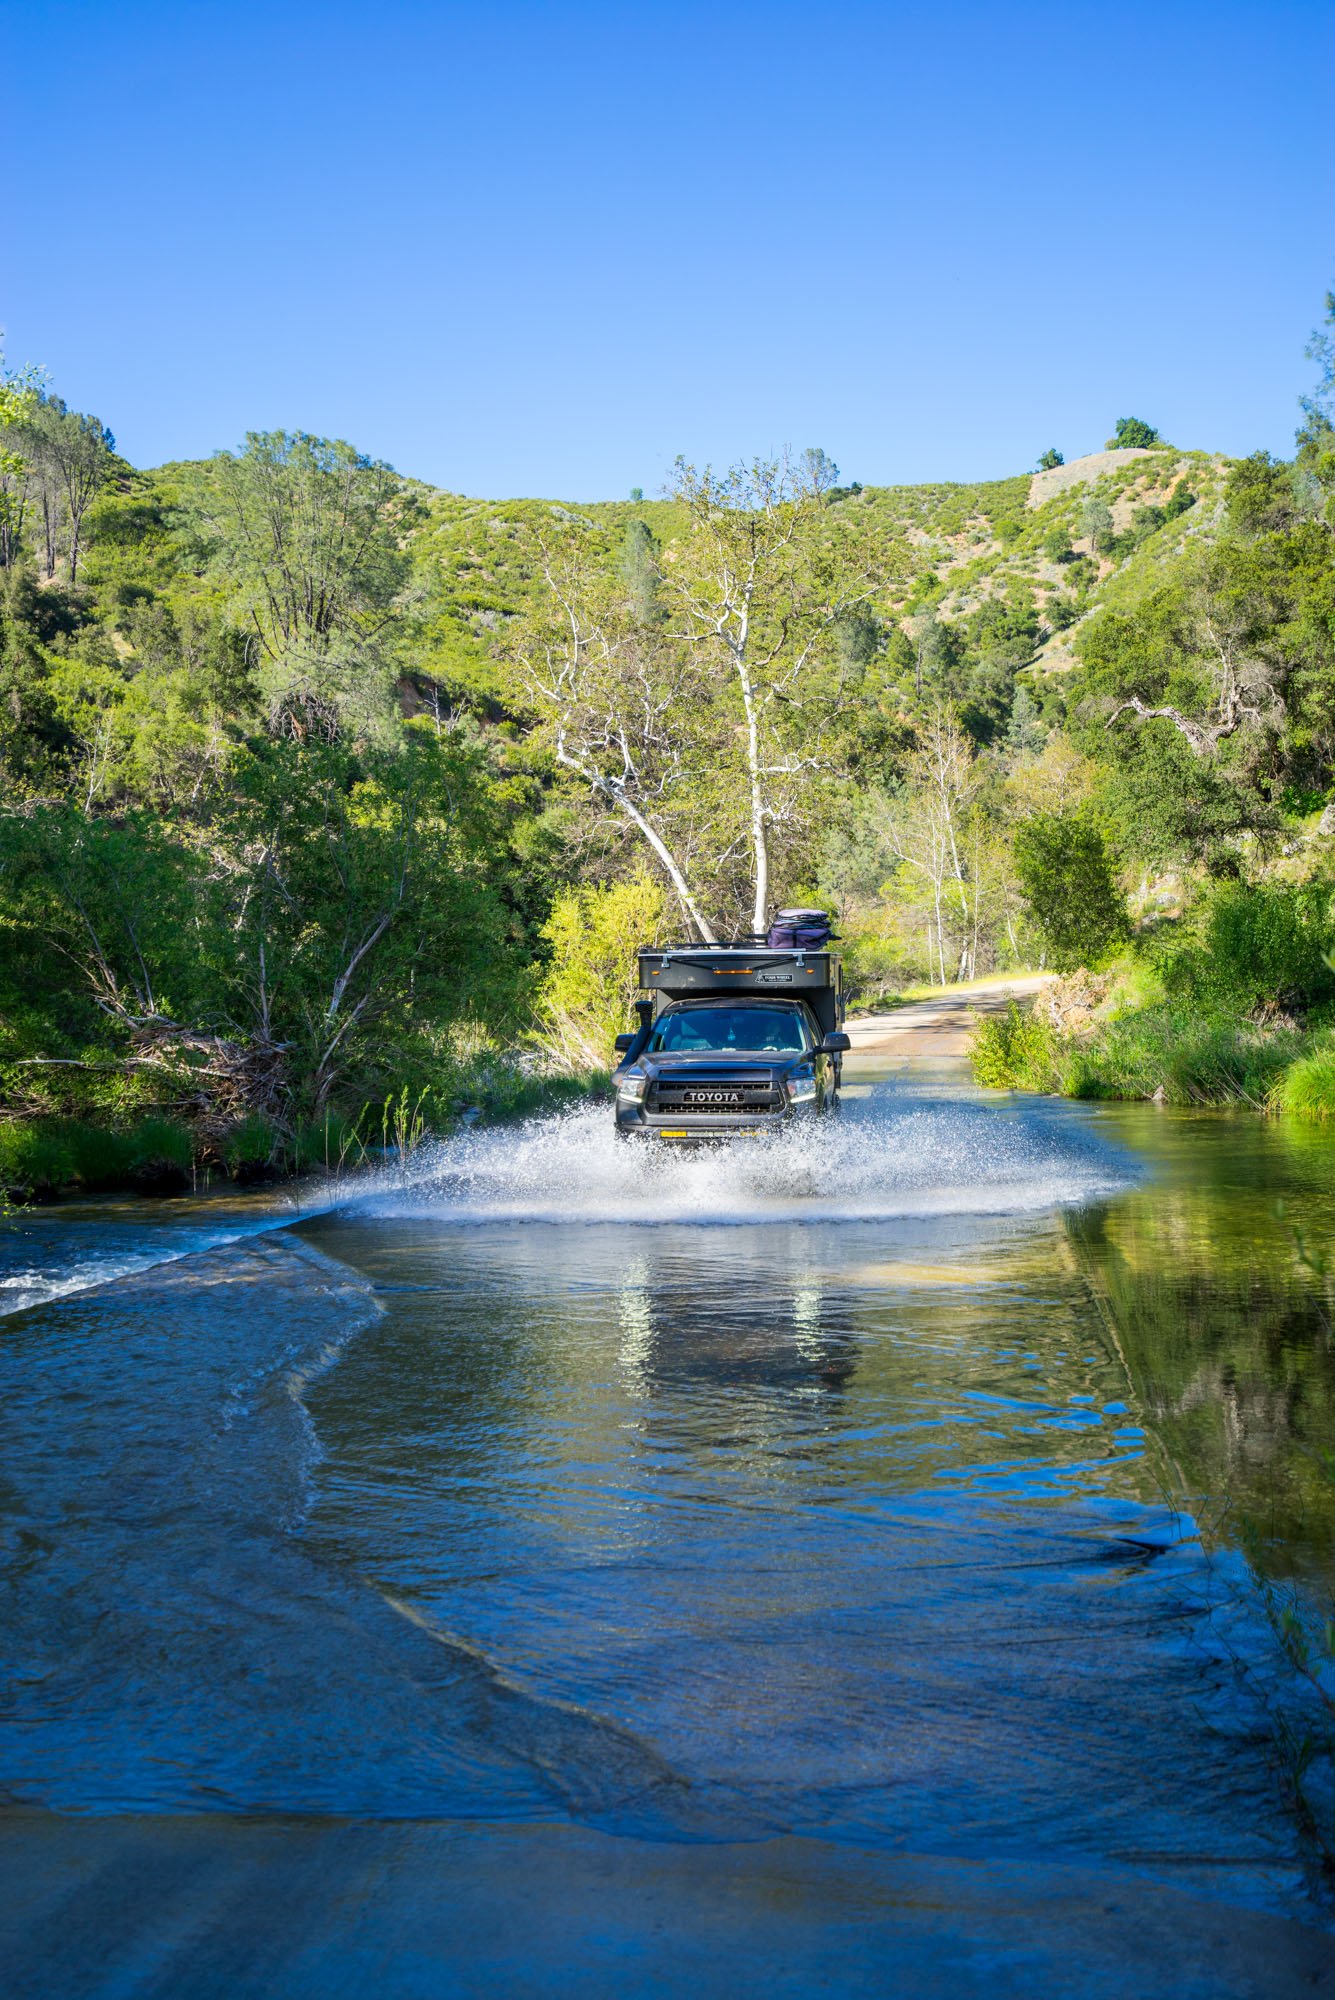  Water crossing on the way to camp 